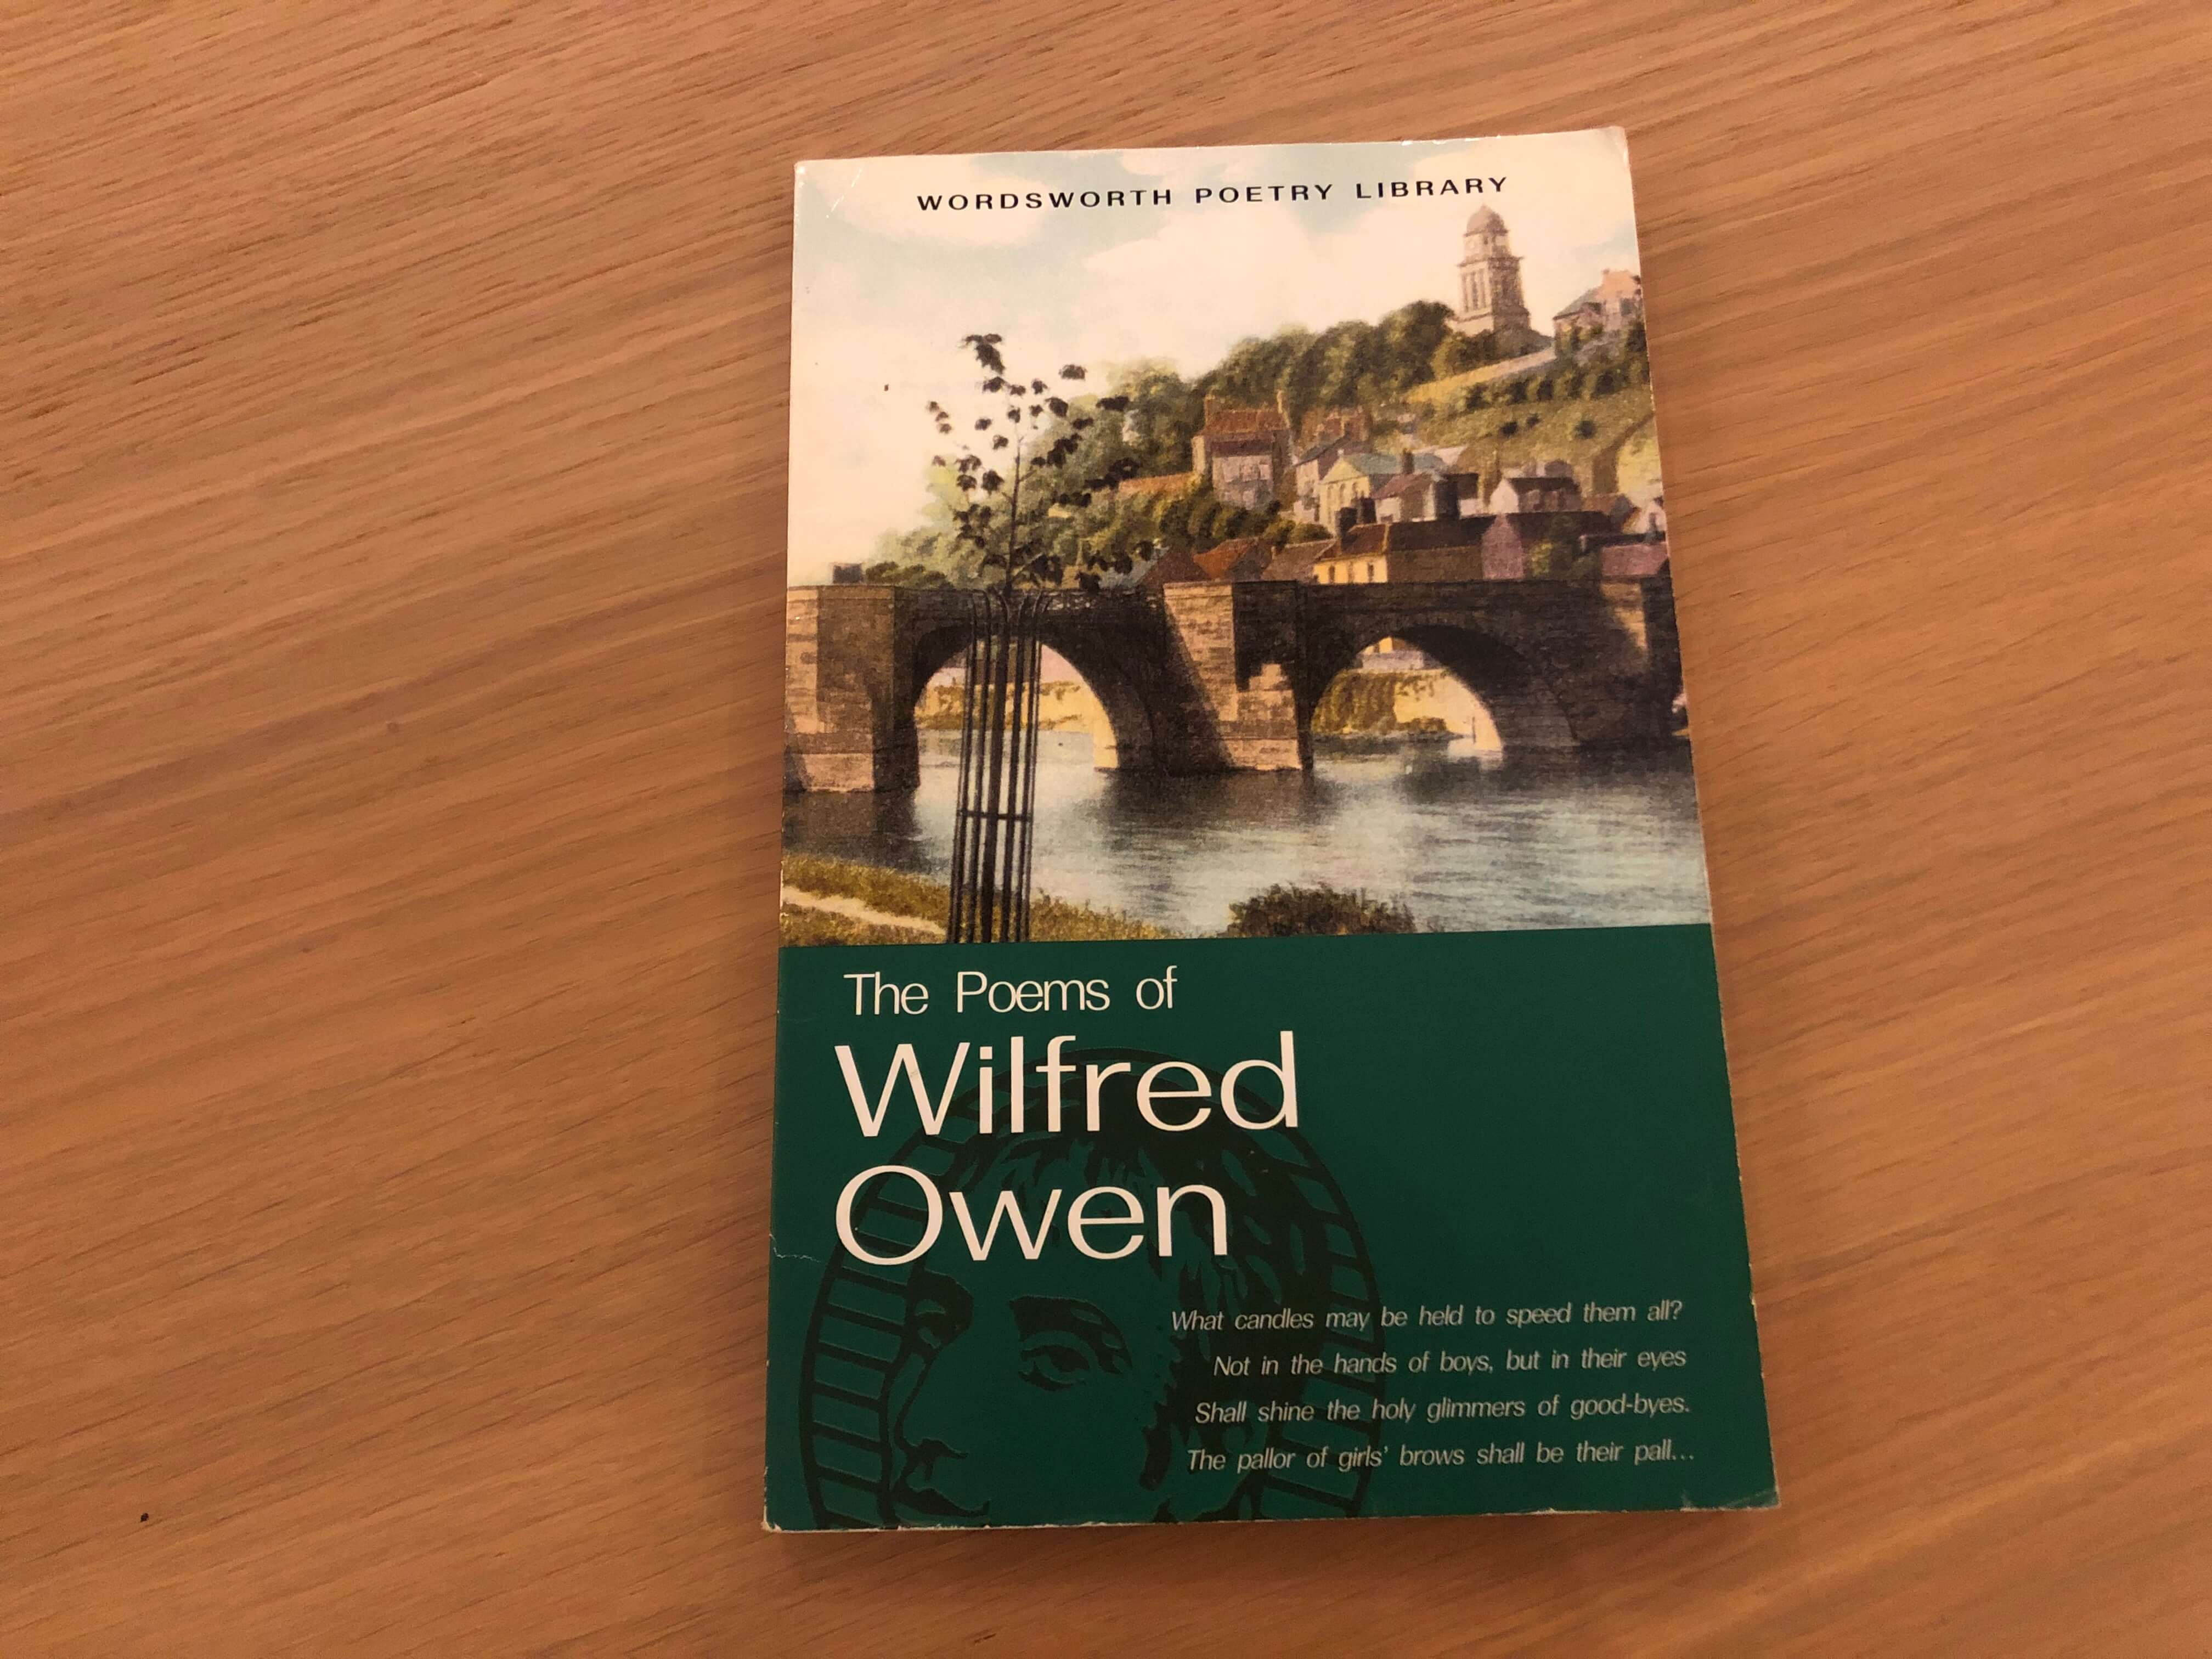 poems of wilfred owen review